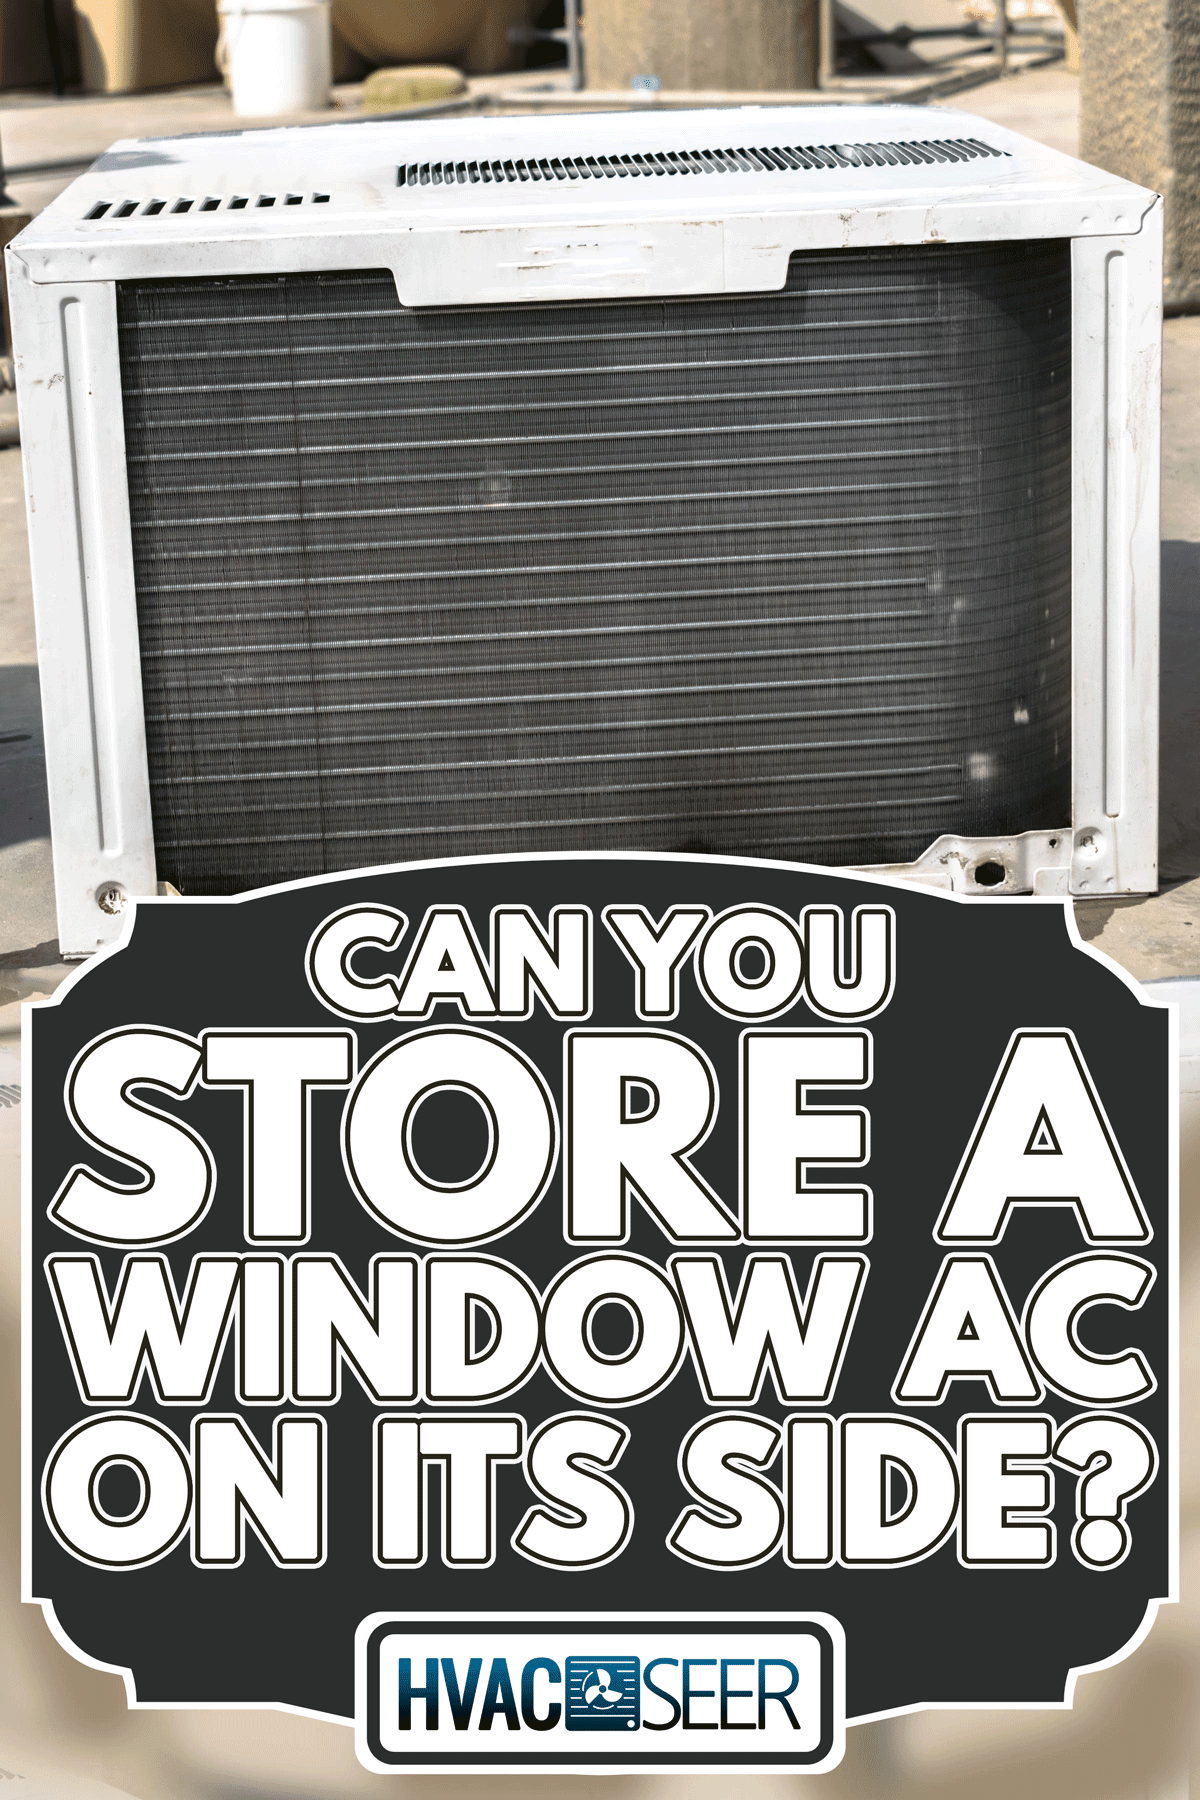 A dusty and dirty air conditioning cooling system is being cleaning by a professional electrician, Can You Store A Window AC On Its Side?